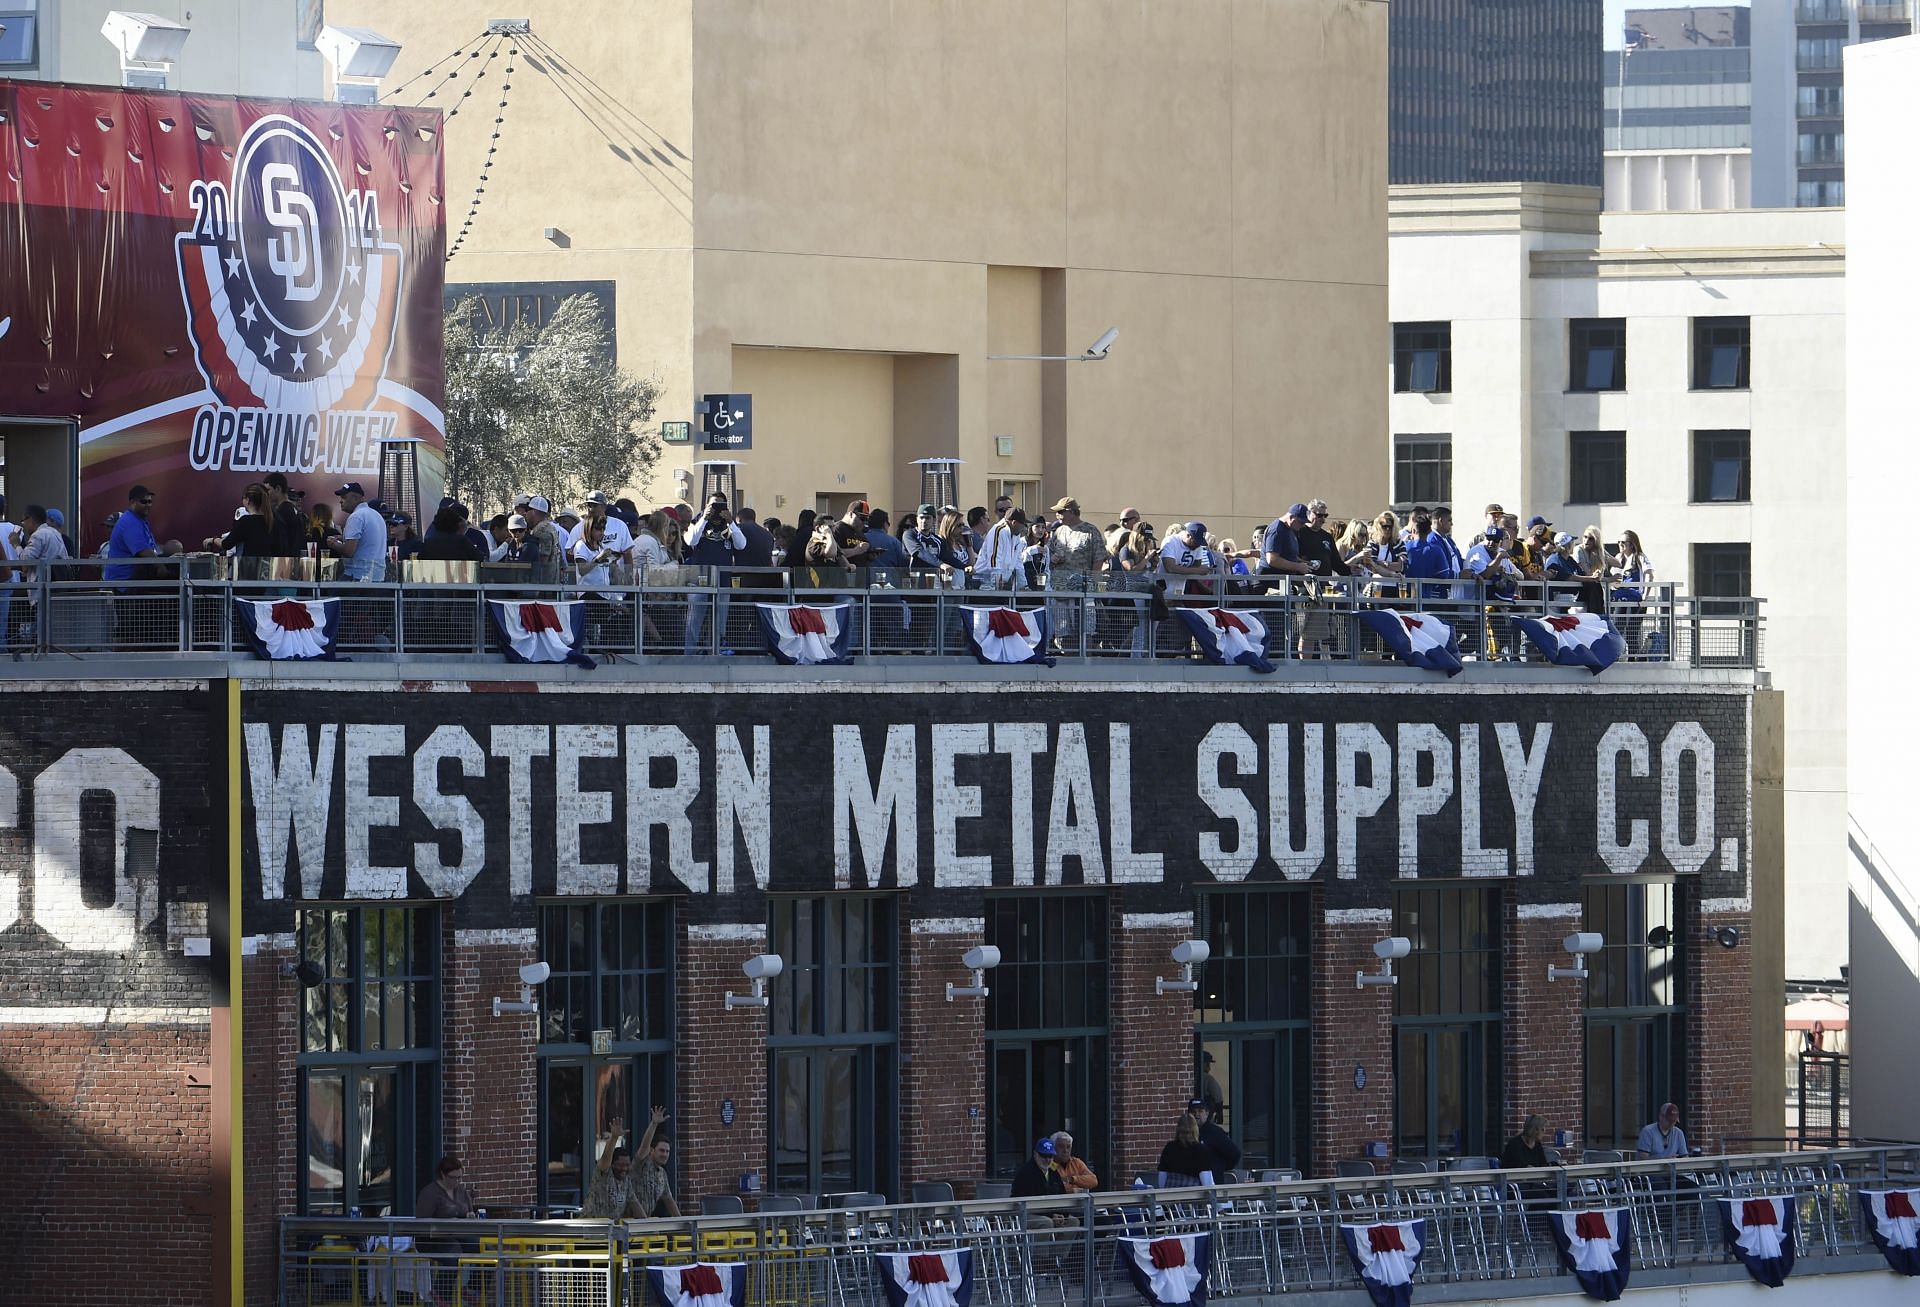 The beautiful brick facade of the Western Metal Supply CO. makes up the left-field wall at Petco Park.